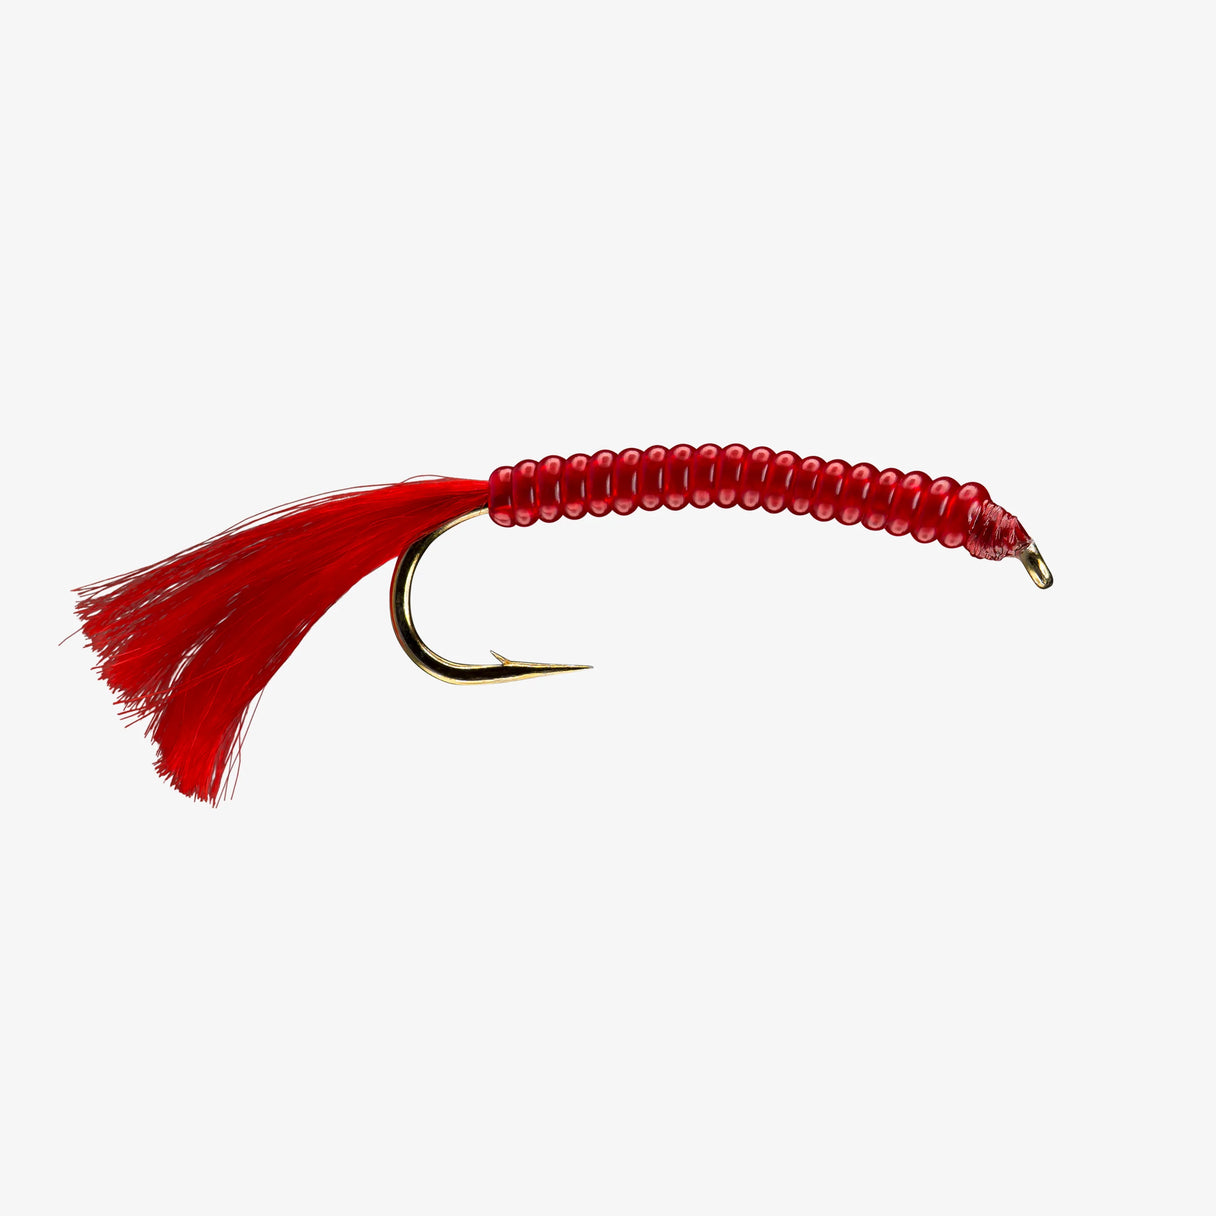 Rio Atomic Worm - Red - Size 6